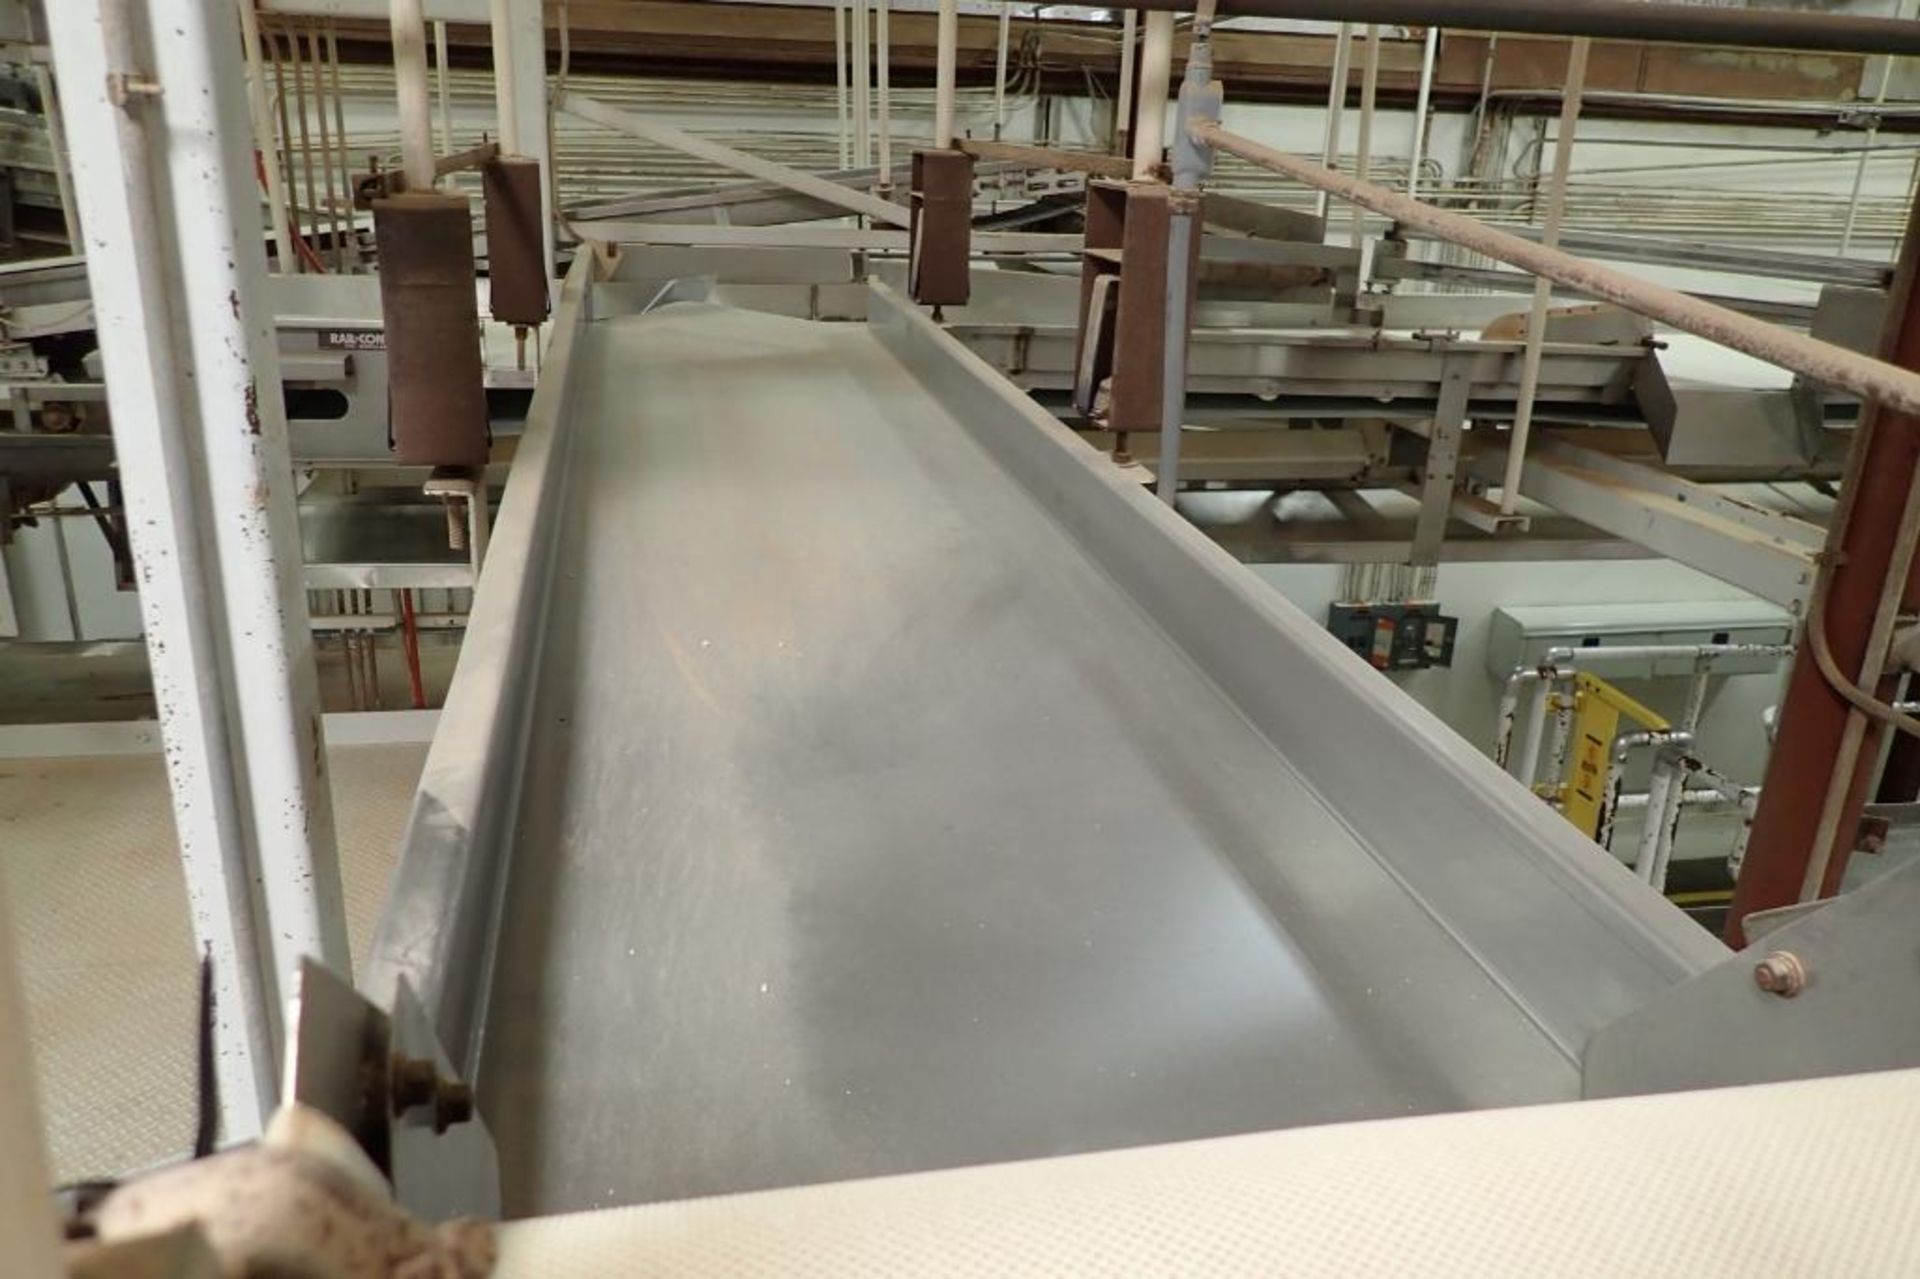 Mild steel vibratory conveyor, SS trough, 10 ft. long x 24 in. wide, suspended from ceiling. **Riggi - Image 2 of 6